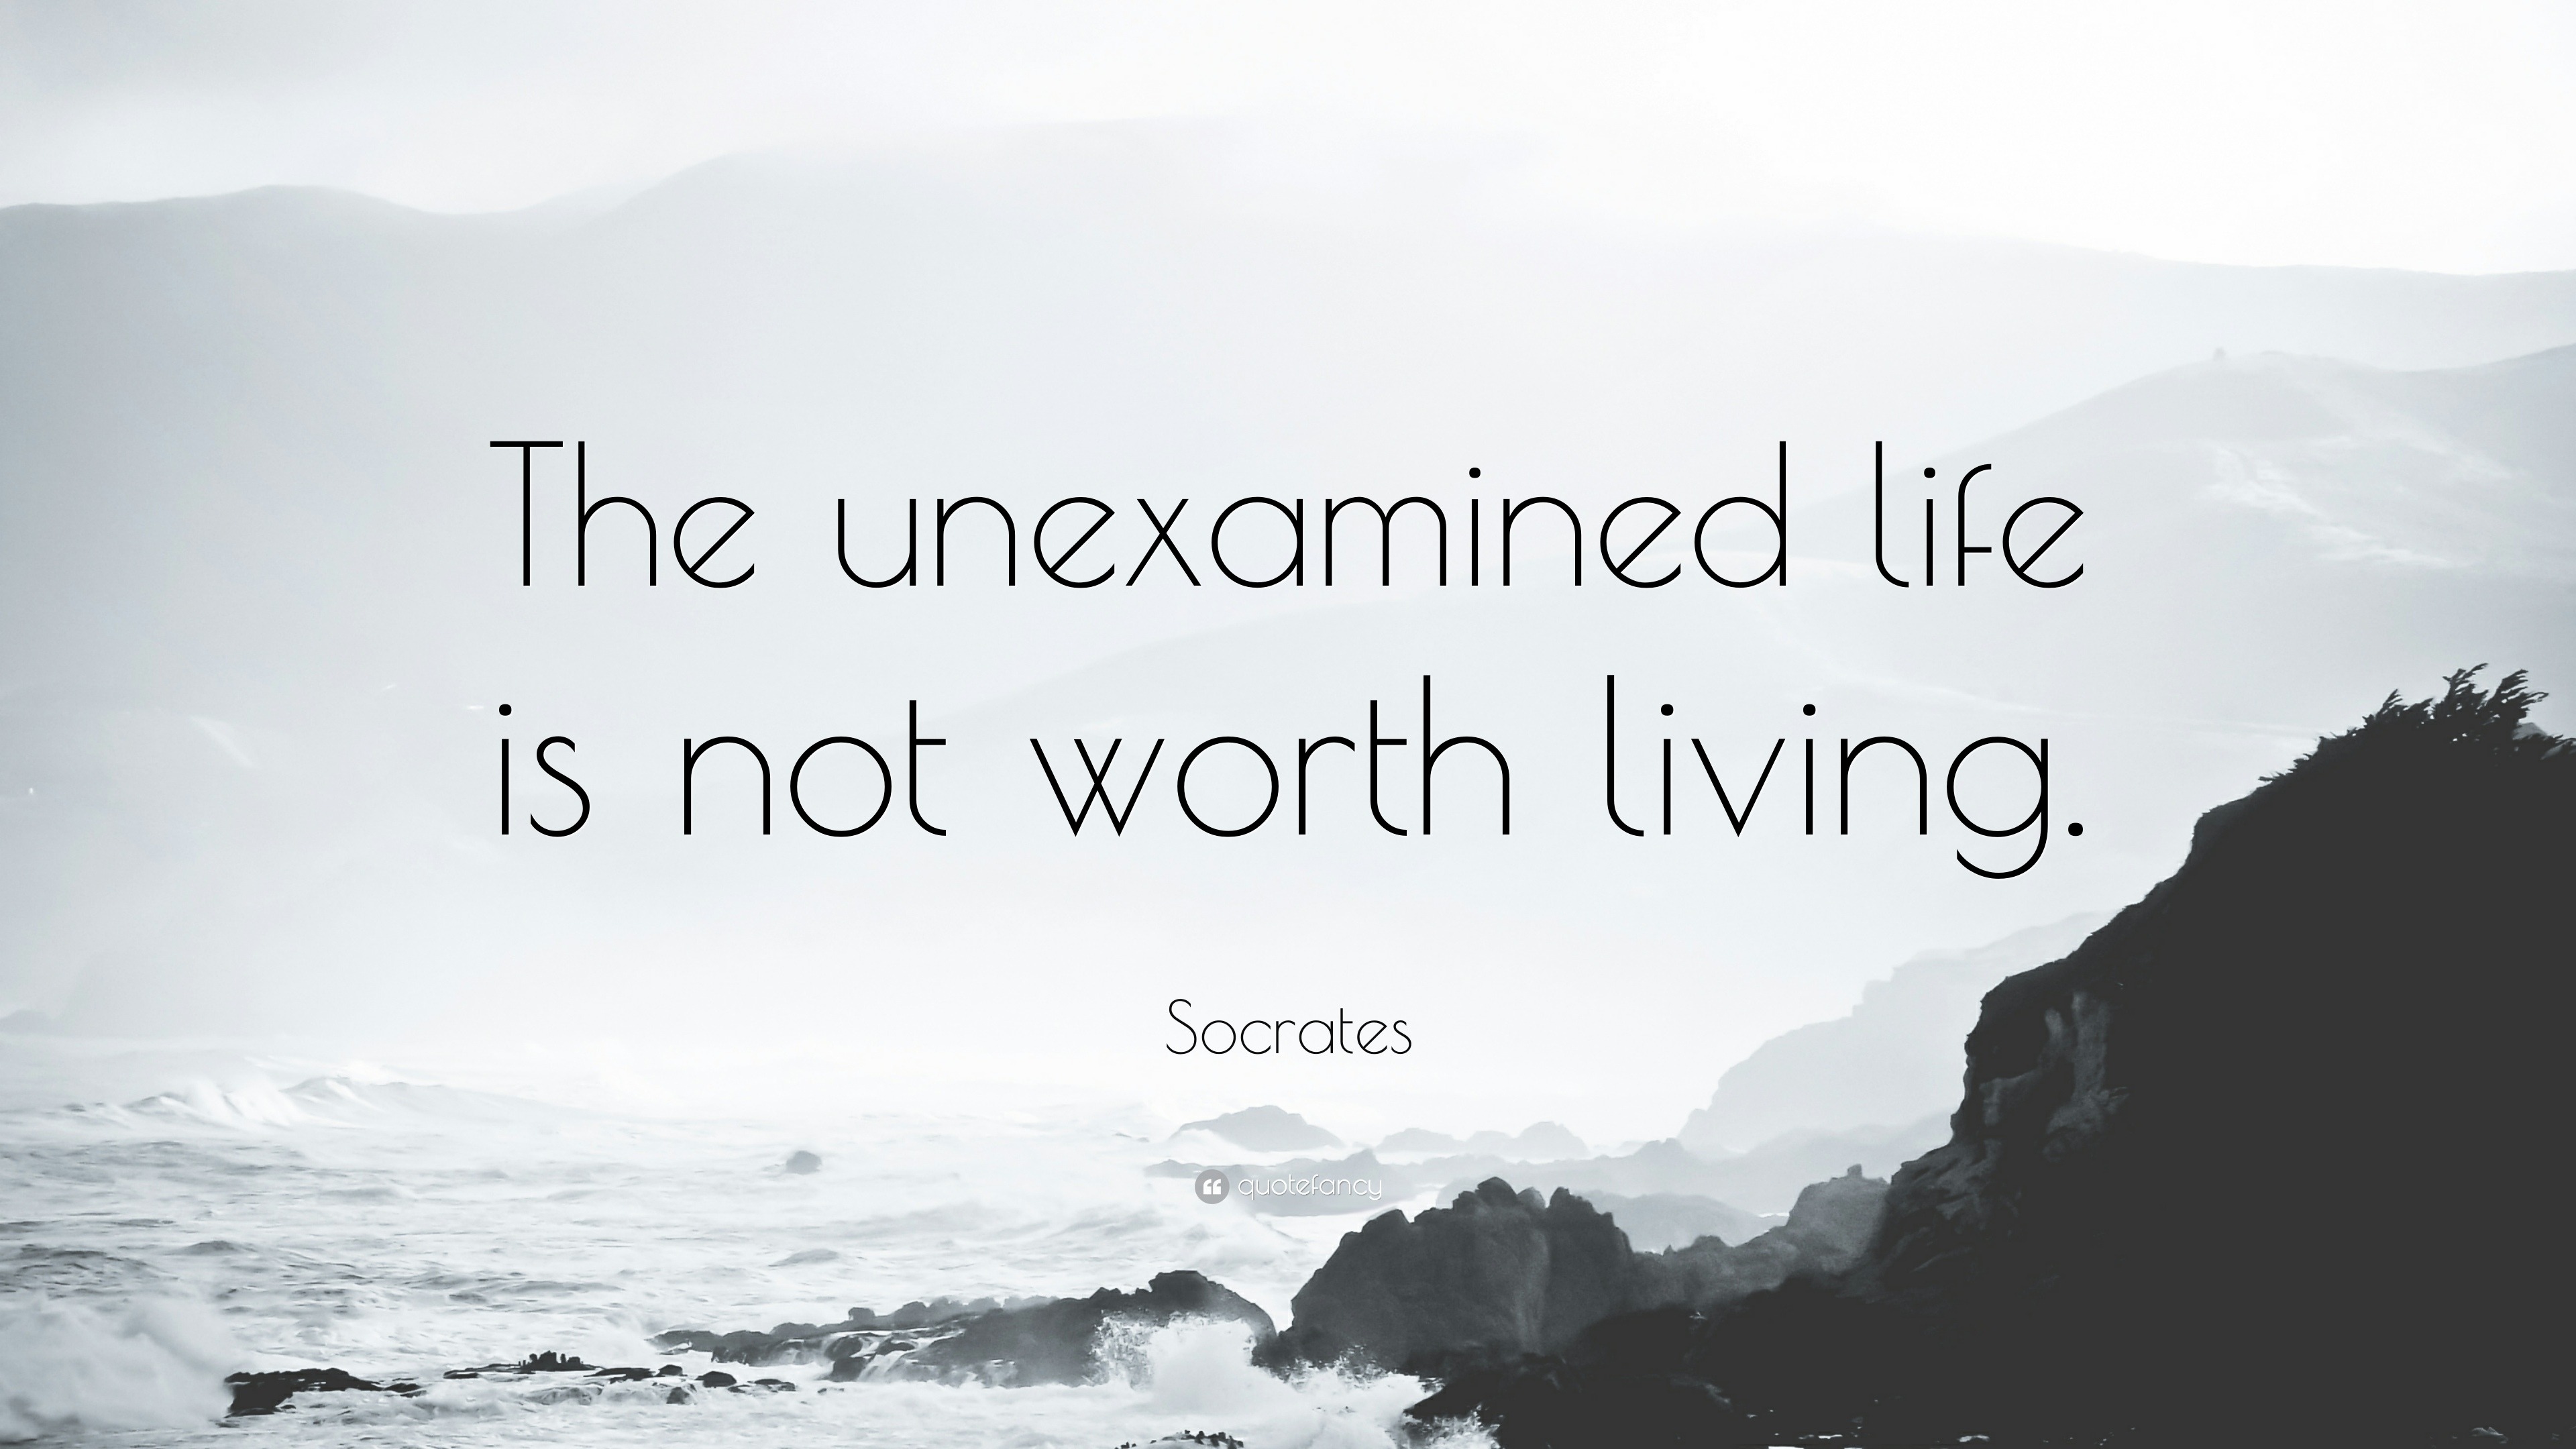 explain the unexamined life is not worth living